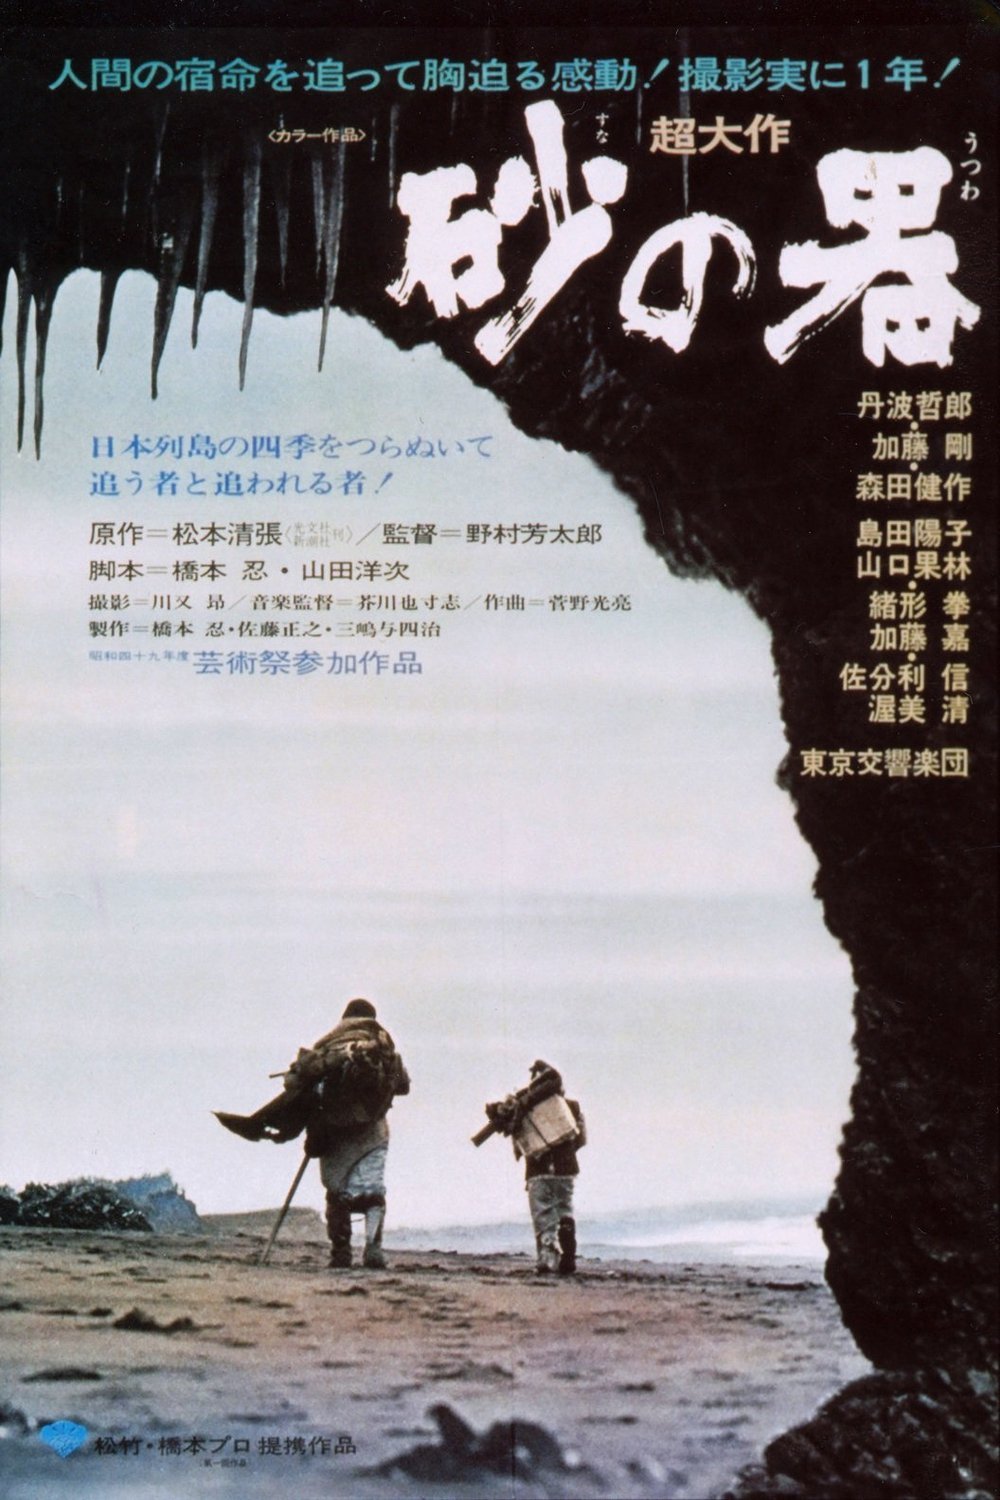 Japanese poster of the movie The Castle of Sand